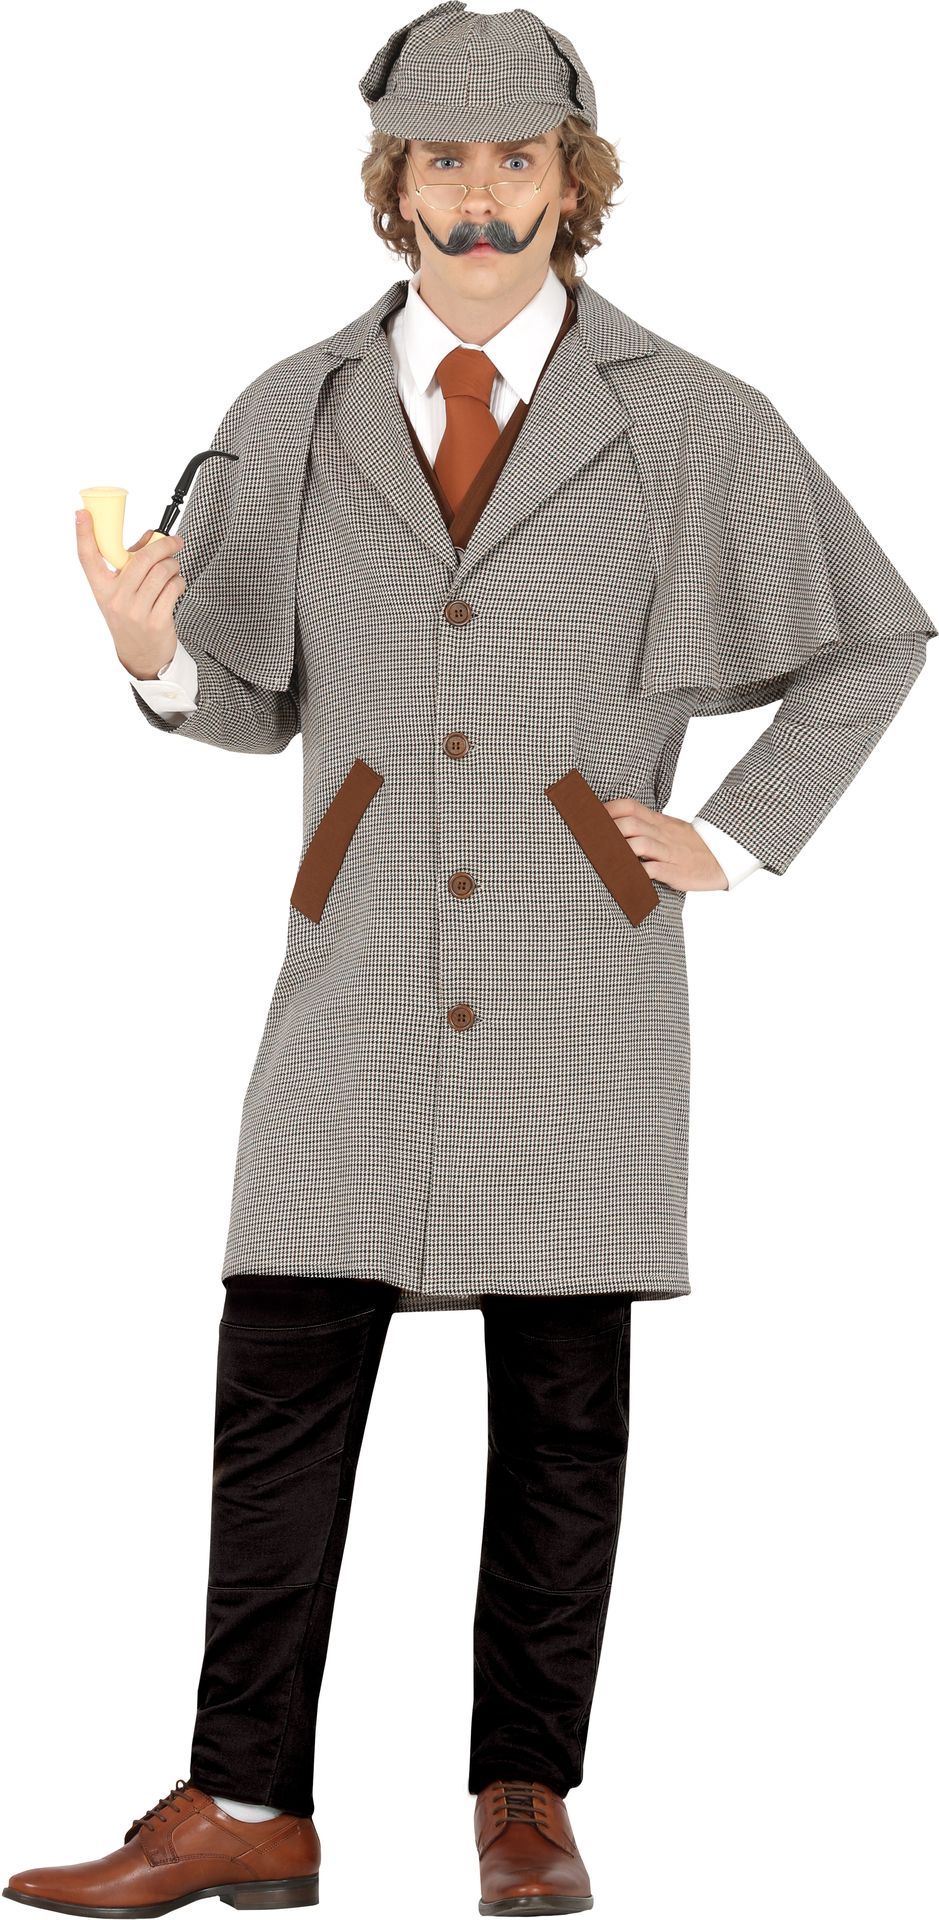 Detective Sherlock Holmes outfit